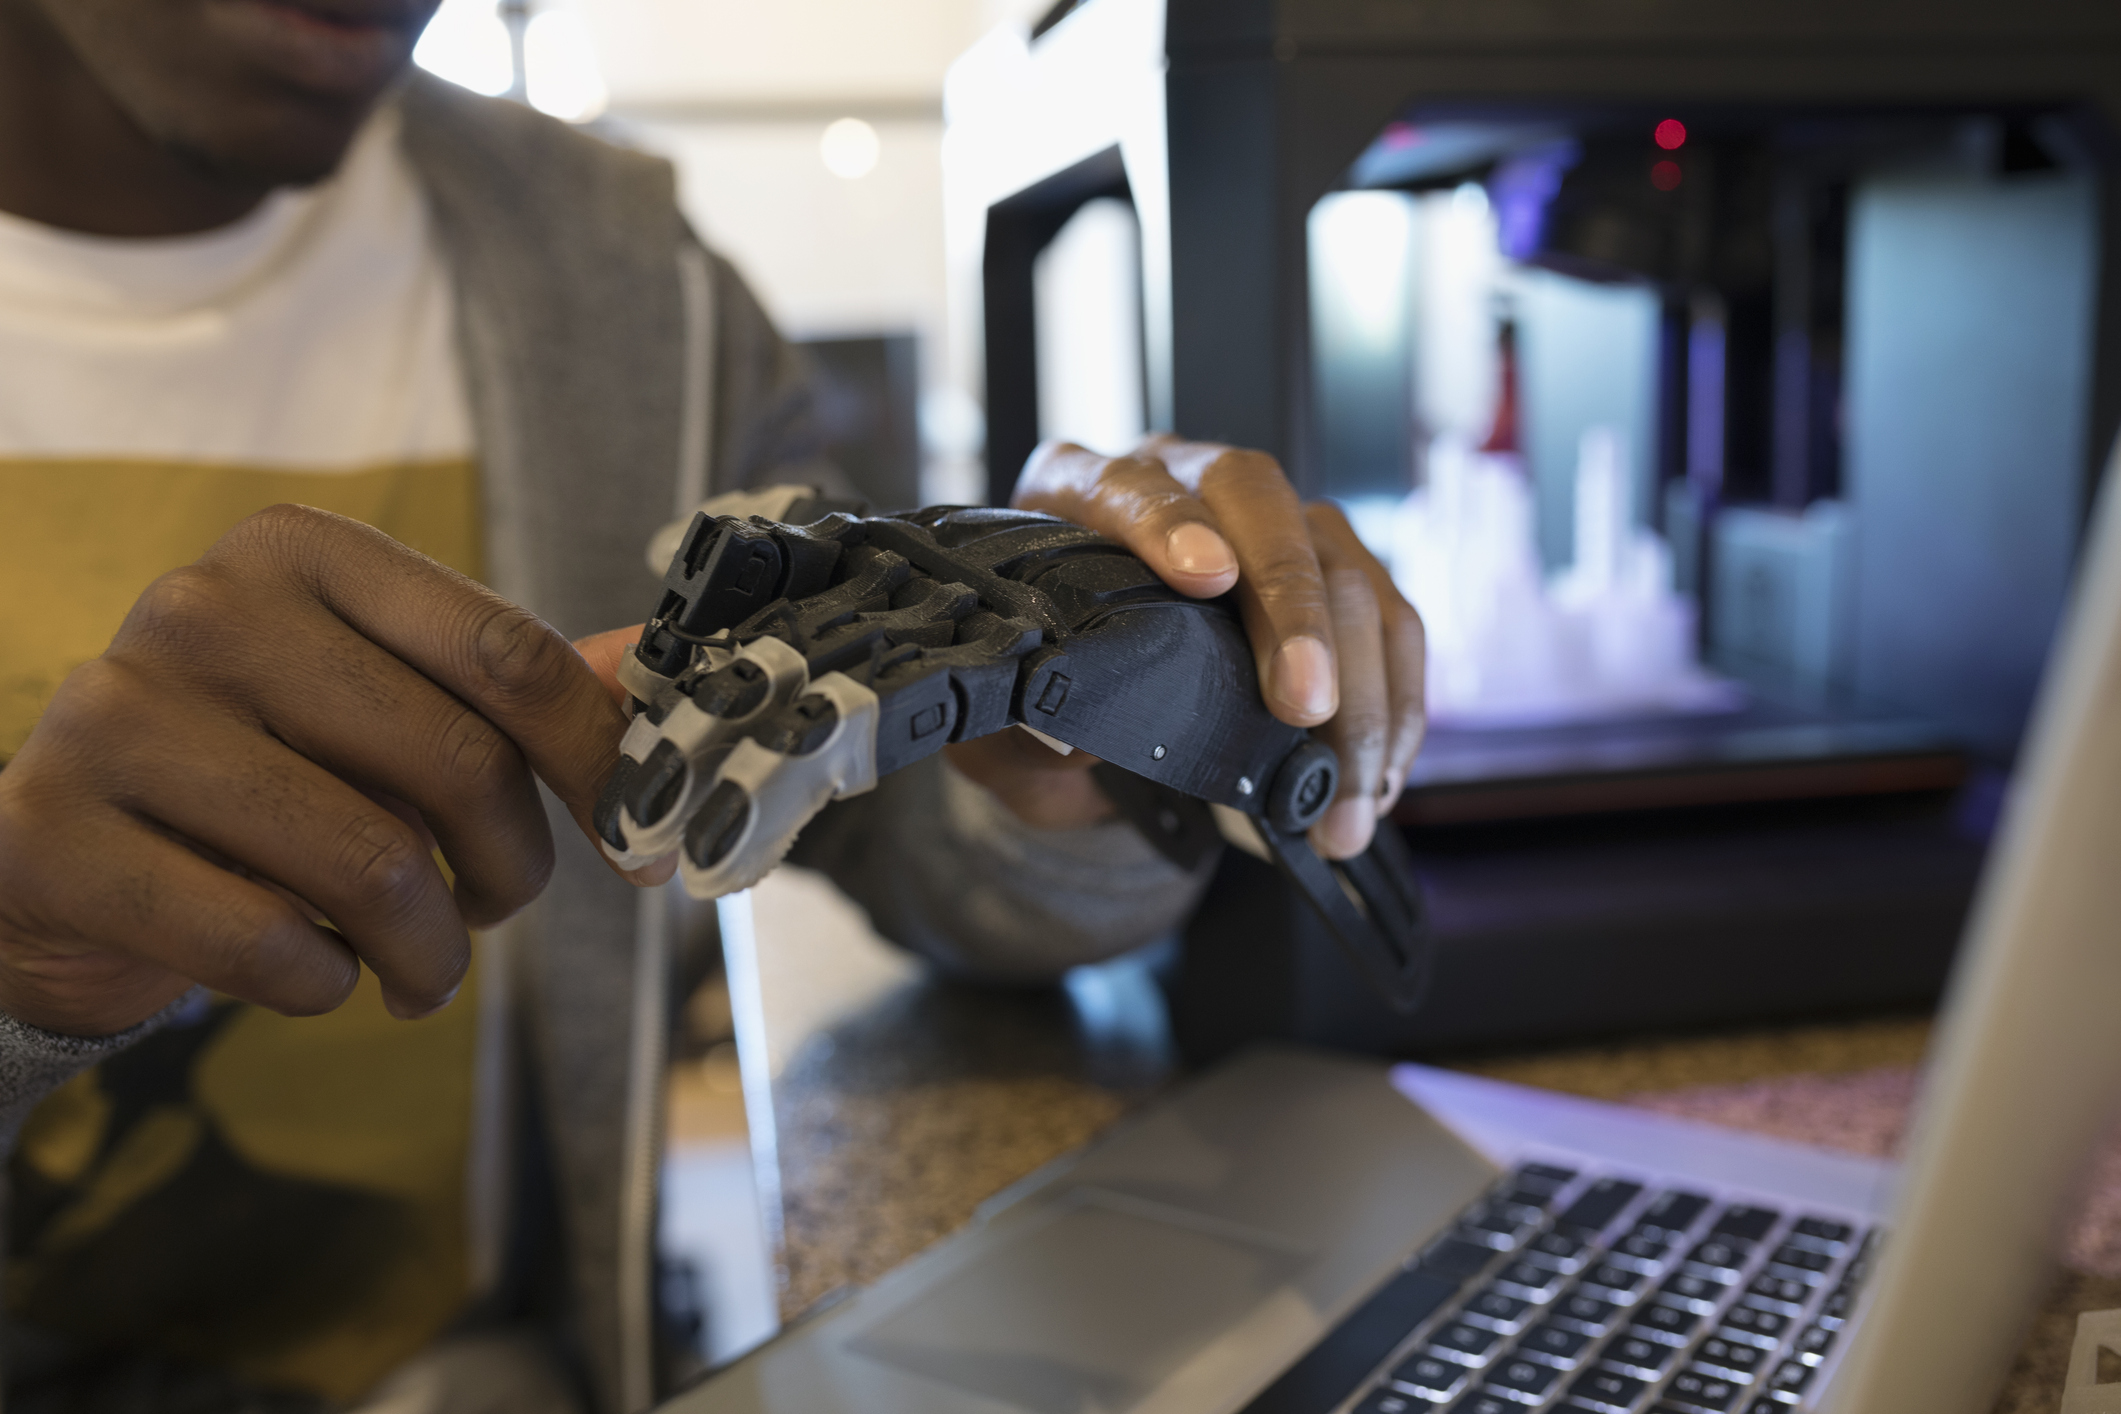 An image of a developer holding a robotic hand